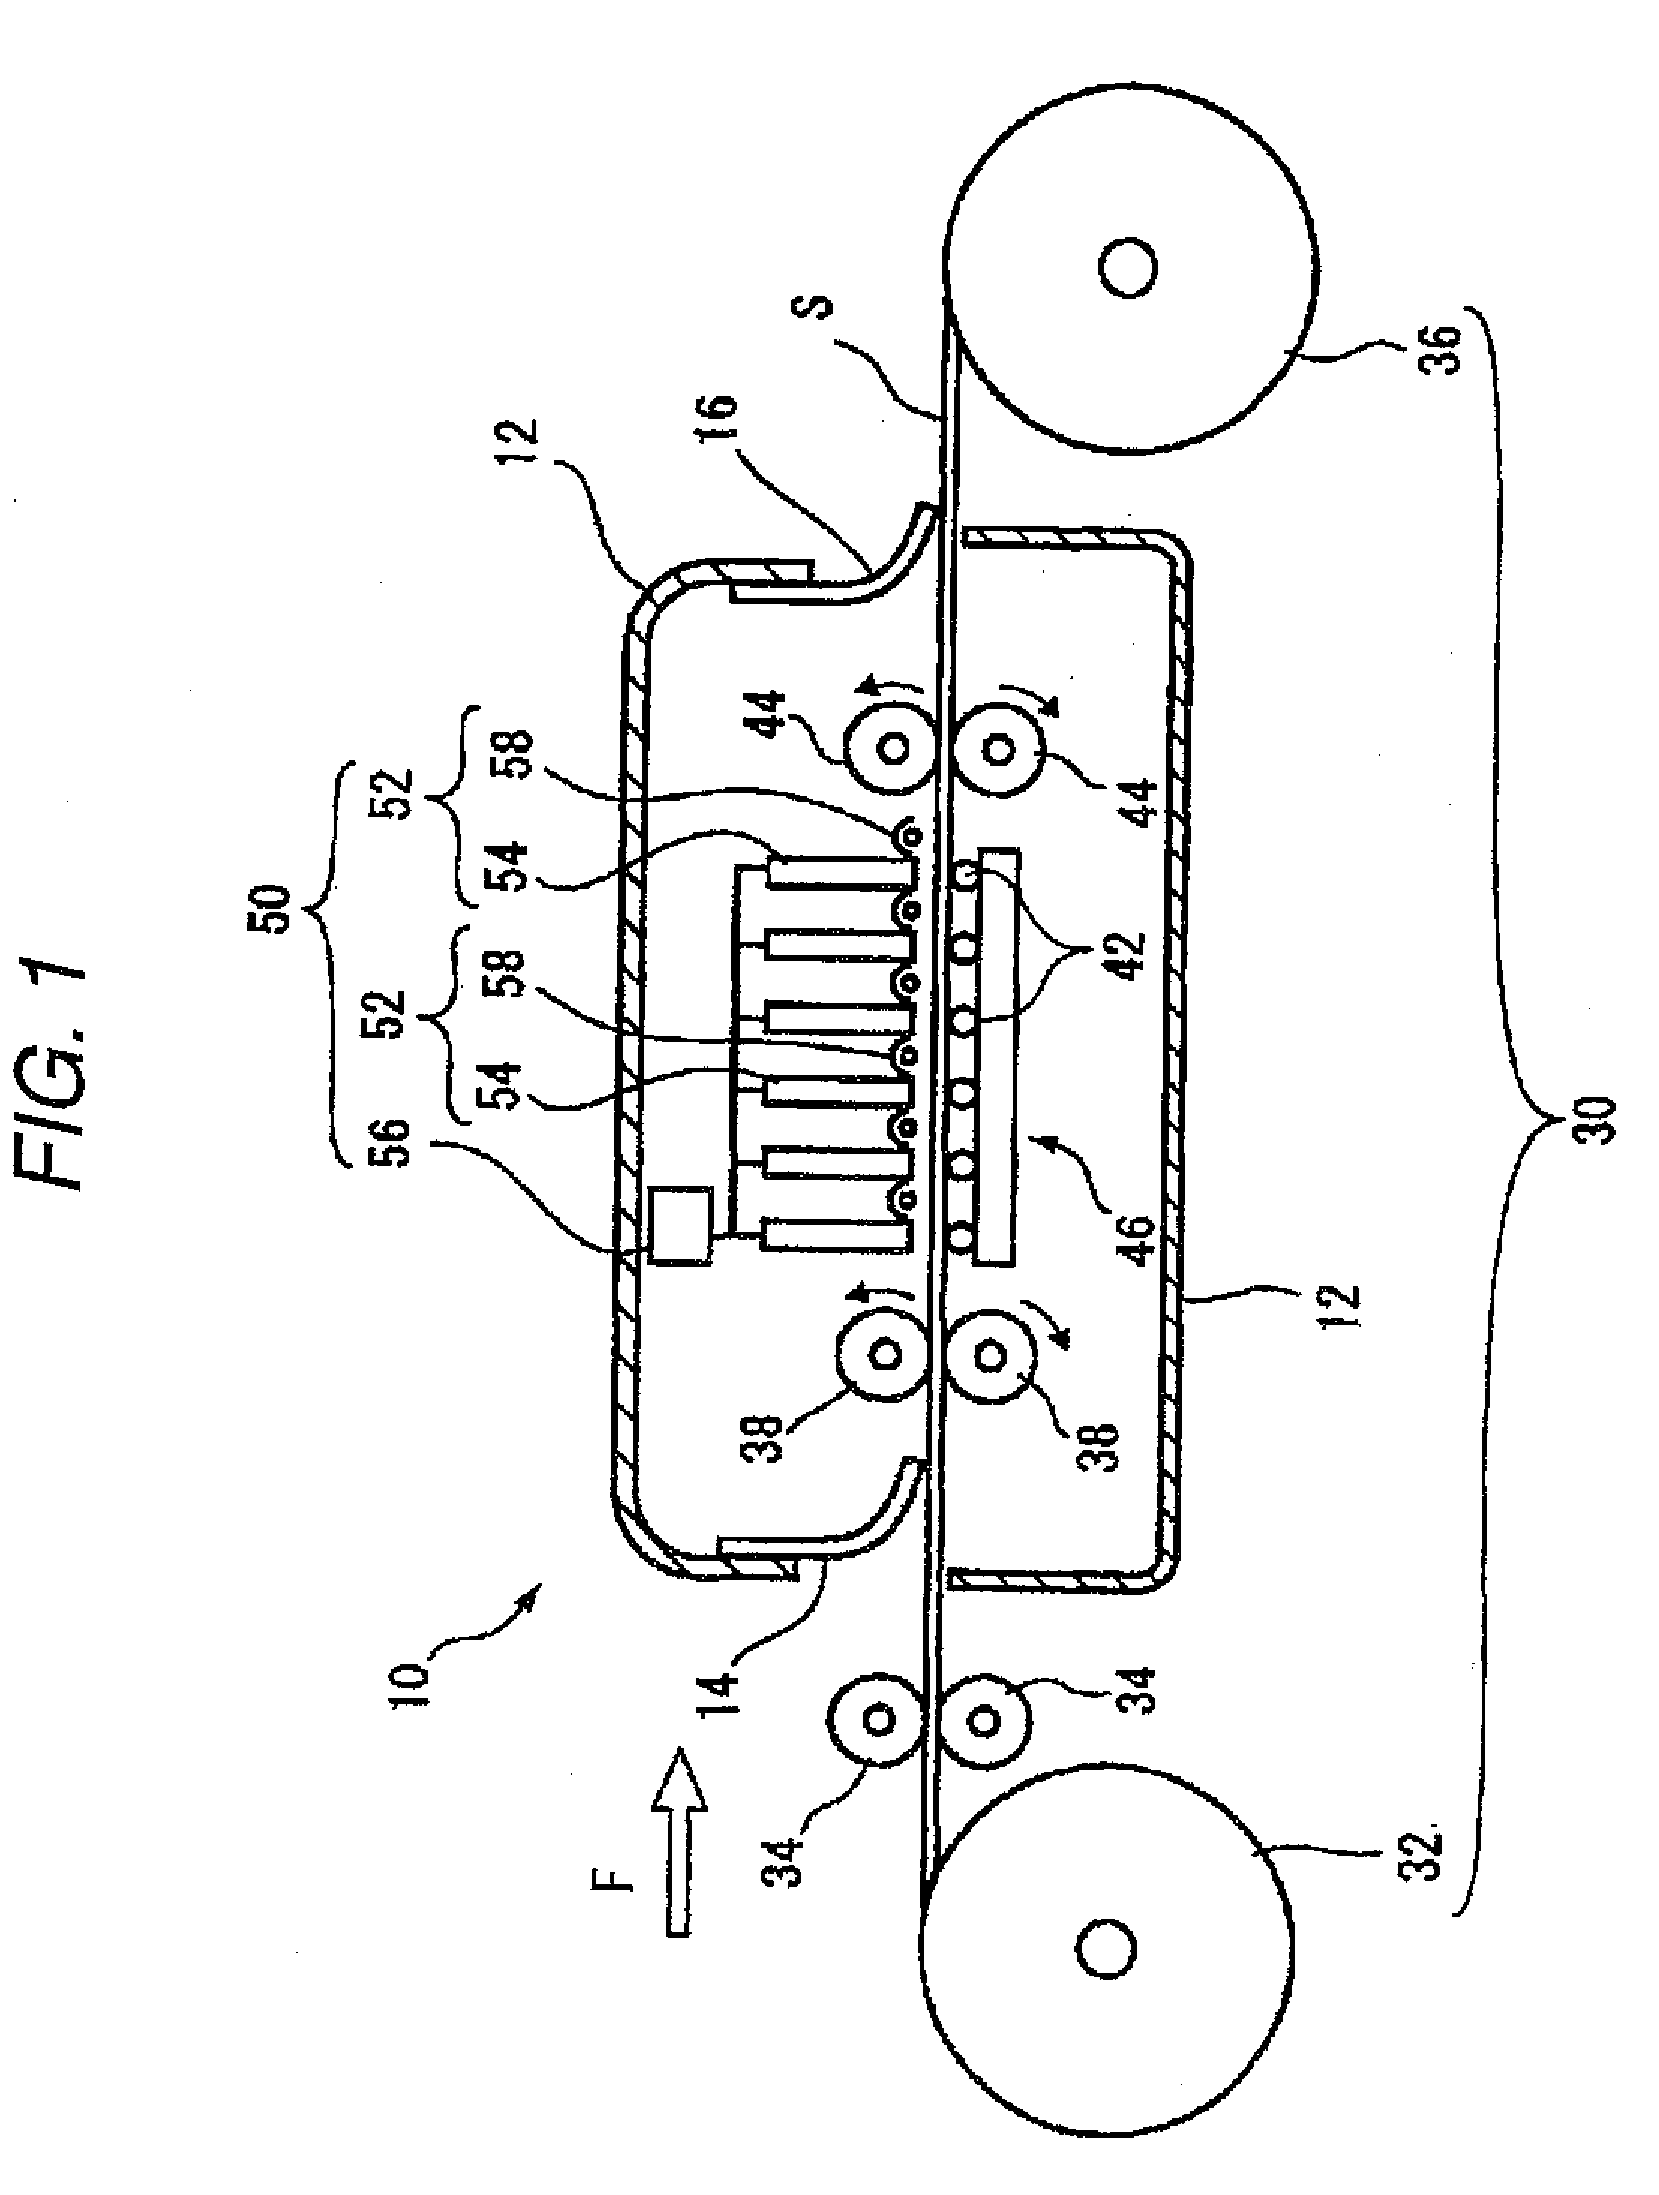 Ink-jet recording method and ink-jet recording apparatus